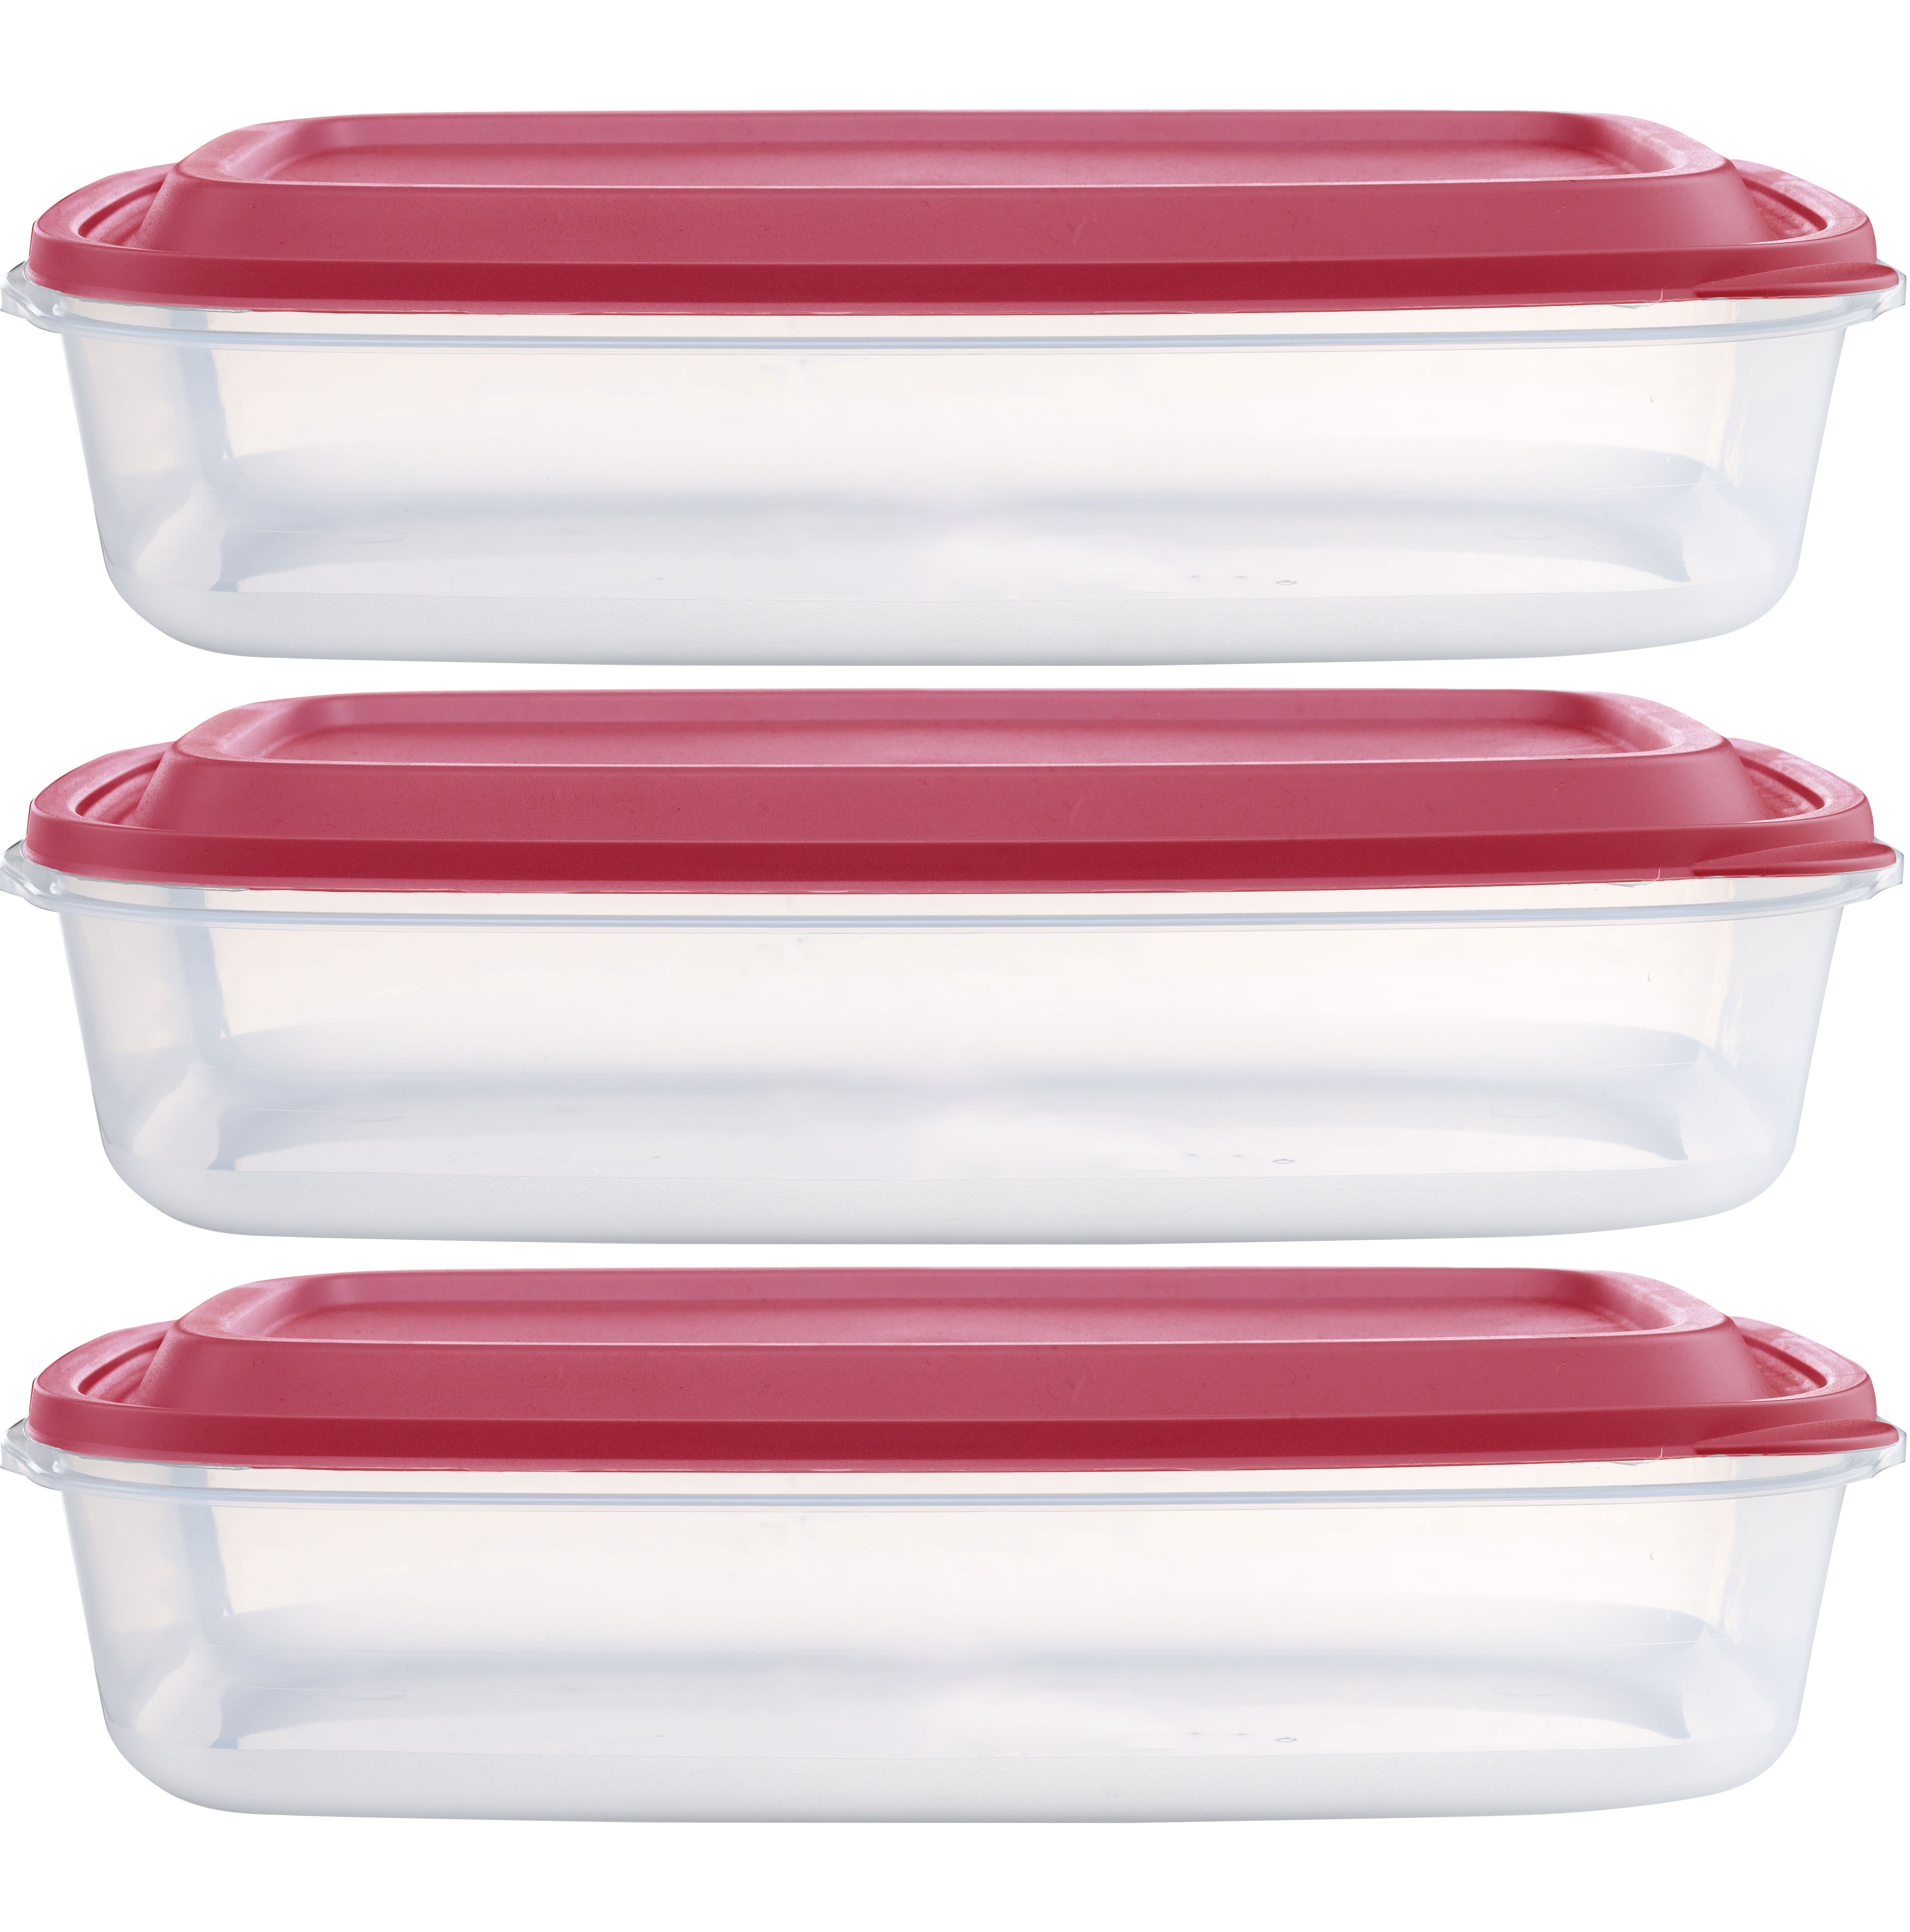 Kitcheniva Plastic Food Containers With Airtight Lids - Red (Pack of 24),  24 pcs - Kroger